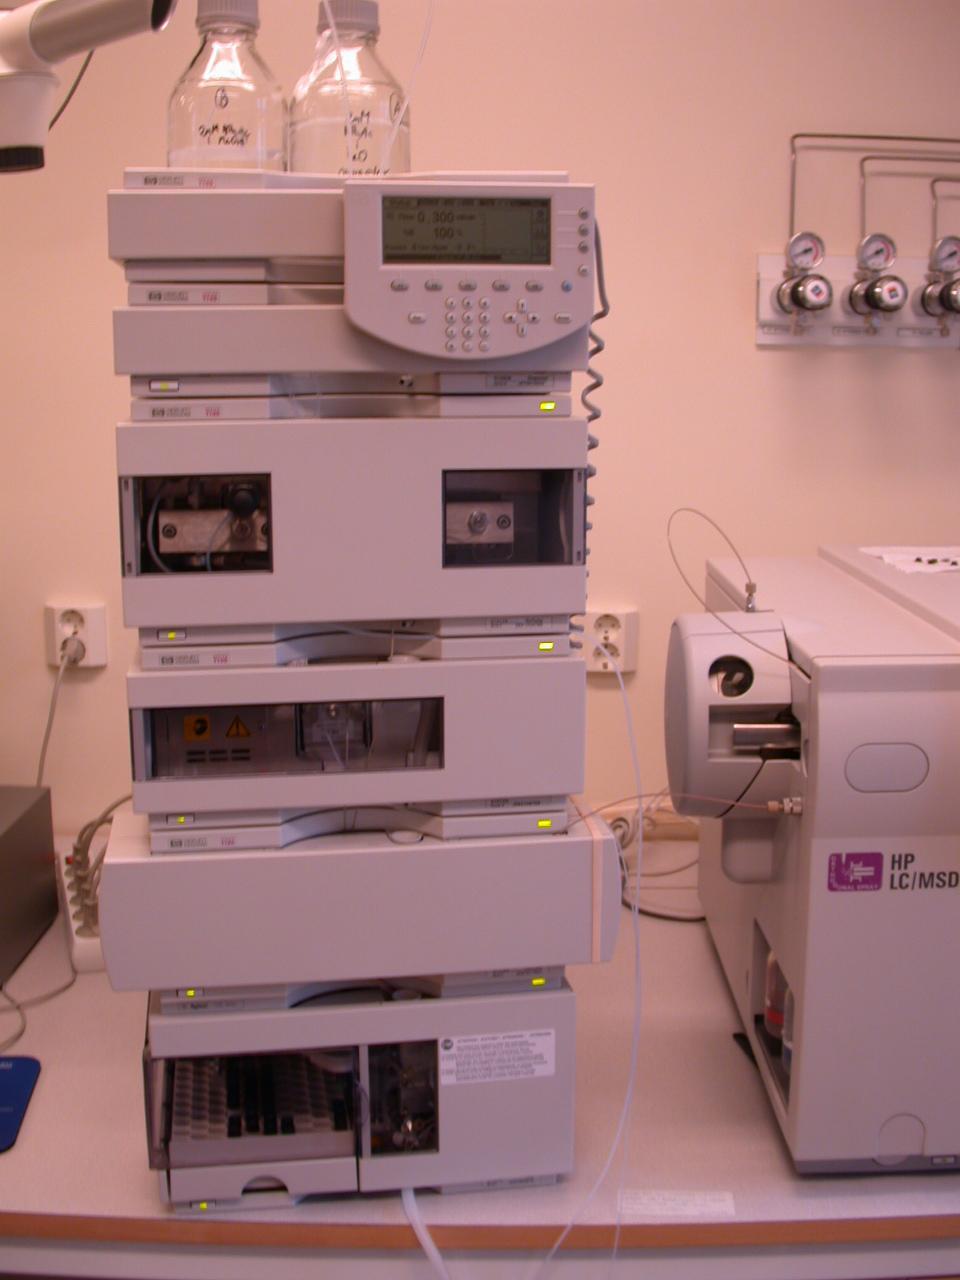 LC-MS HP 1100 LC/MSD Analytical column: Discovery HS C18 (50 x 2.